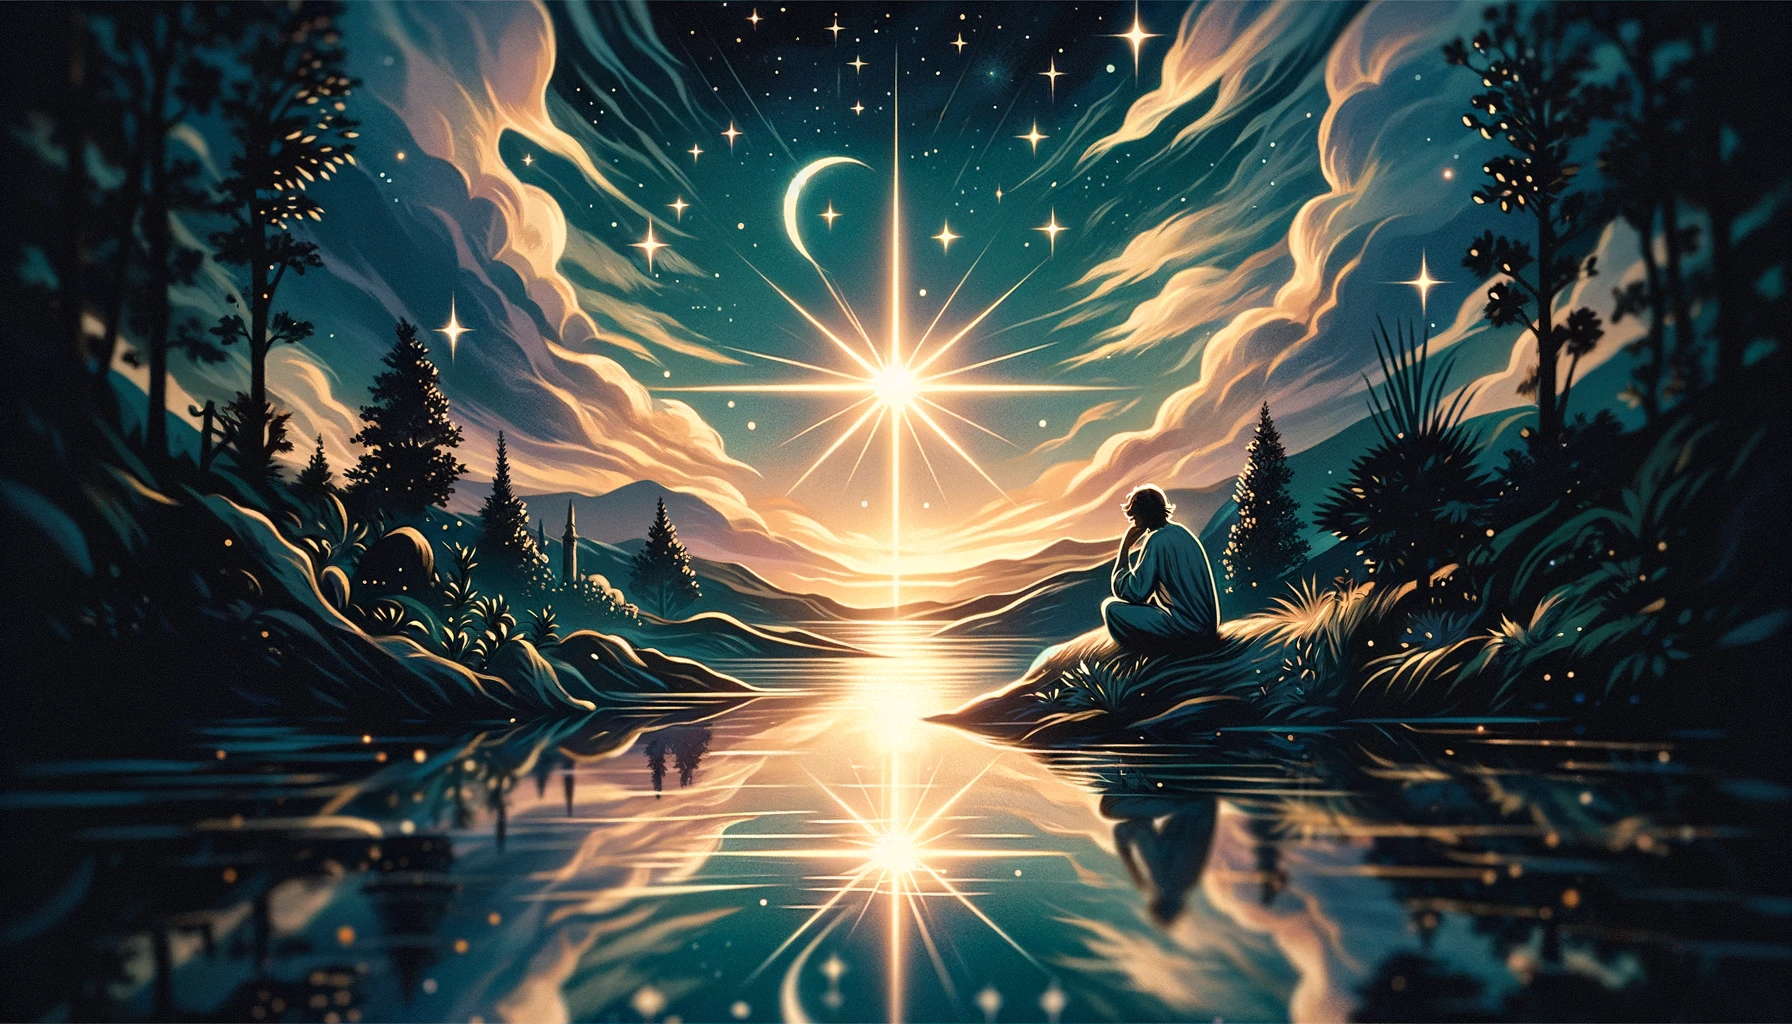 "Image representing the emotional resonance of hope, inspiration, and spiritual renewal, setting a serene and uplifting tone for your article discussing 'The Star' Tarot card. It highlights the sense of peace, optimism, and the potential for emotional growth."